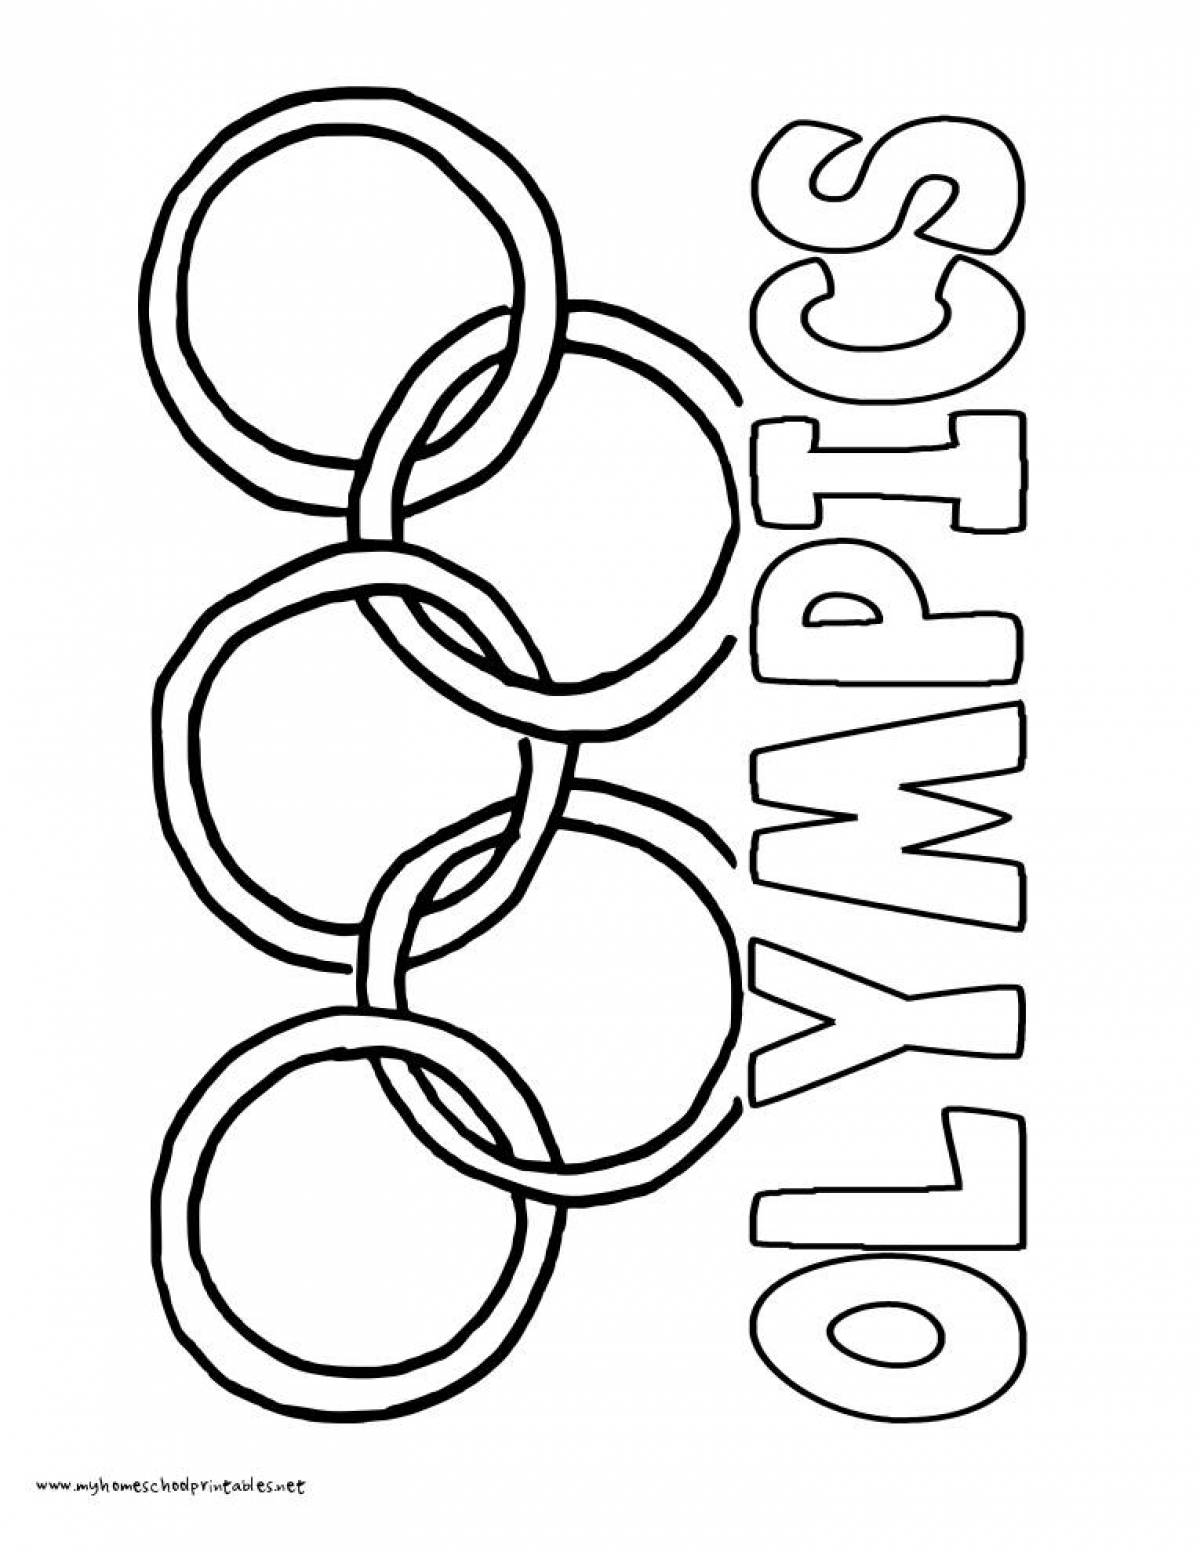 Coloring page holiday olympic rings